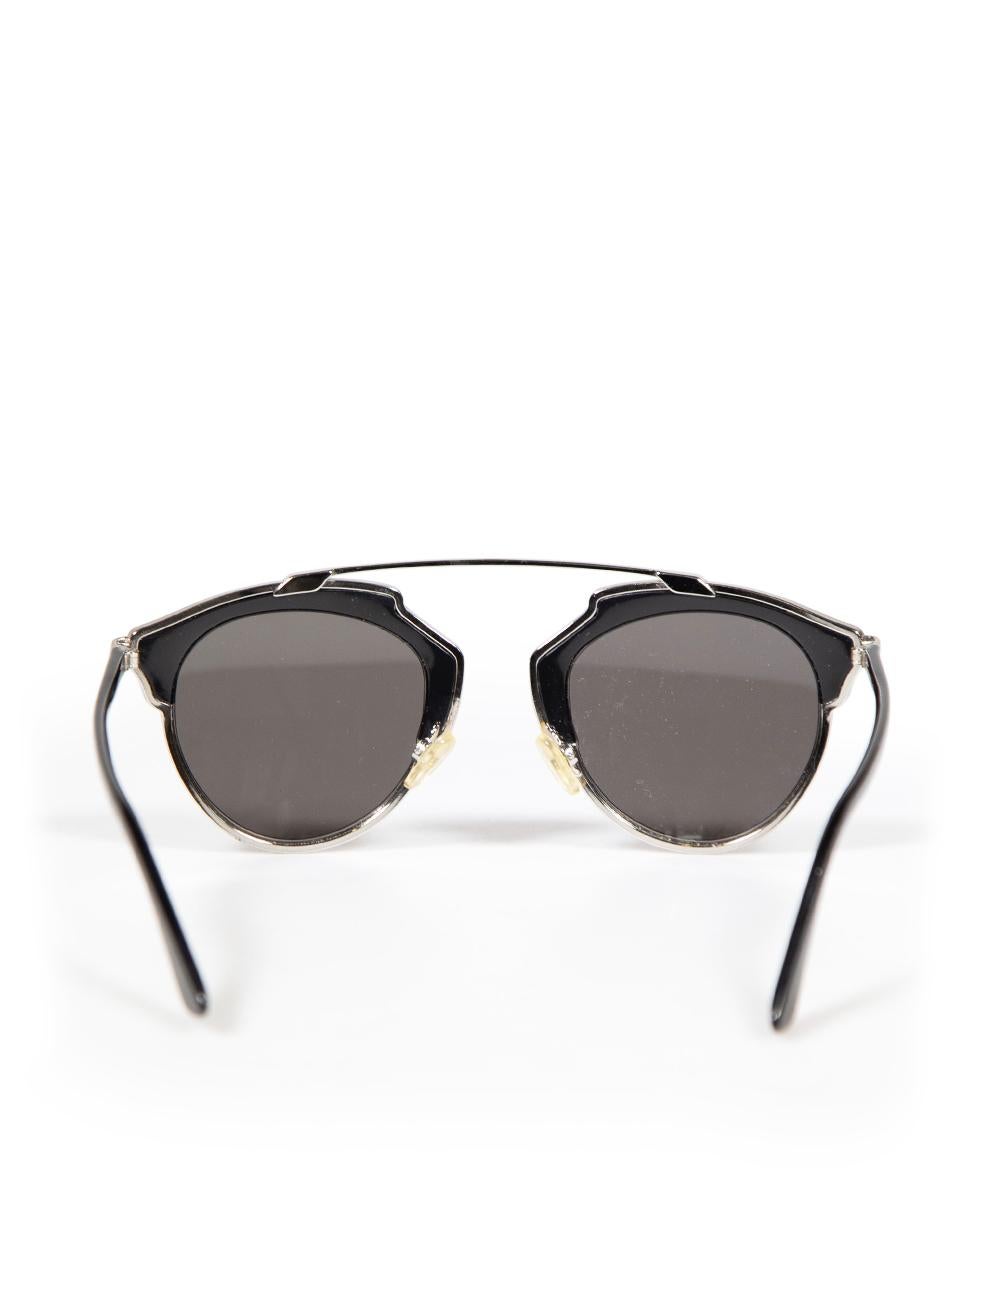 Dior Black So Real Sideral 2 Mirrored Sunglasses In Excellent Condition For Sale In London, GB